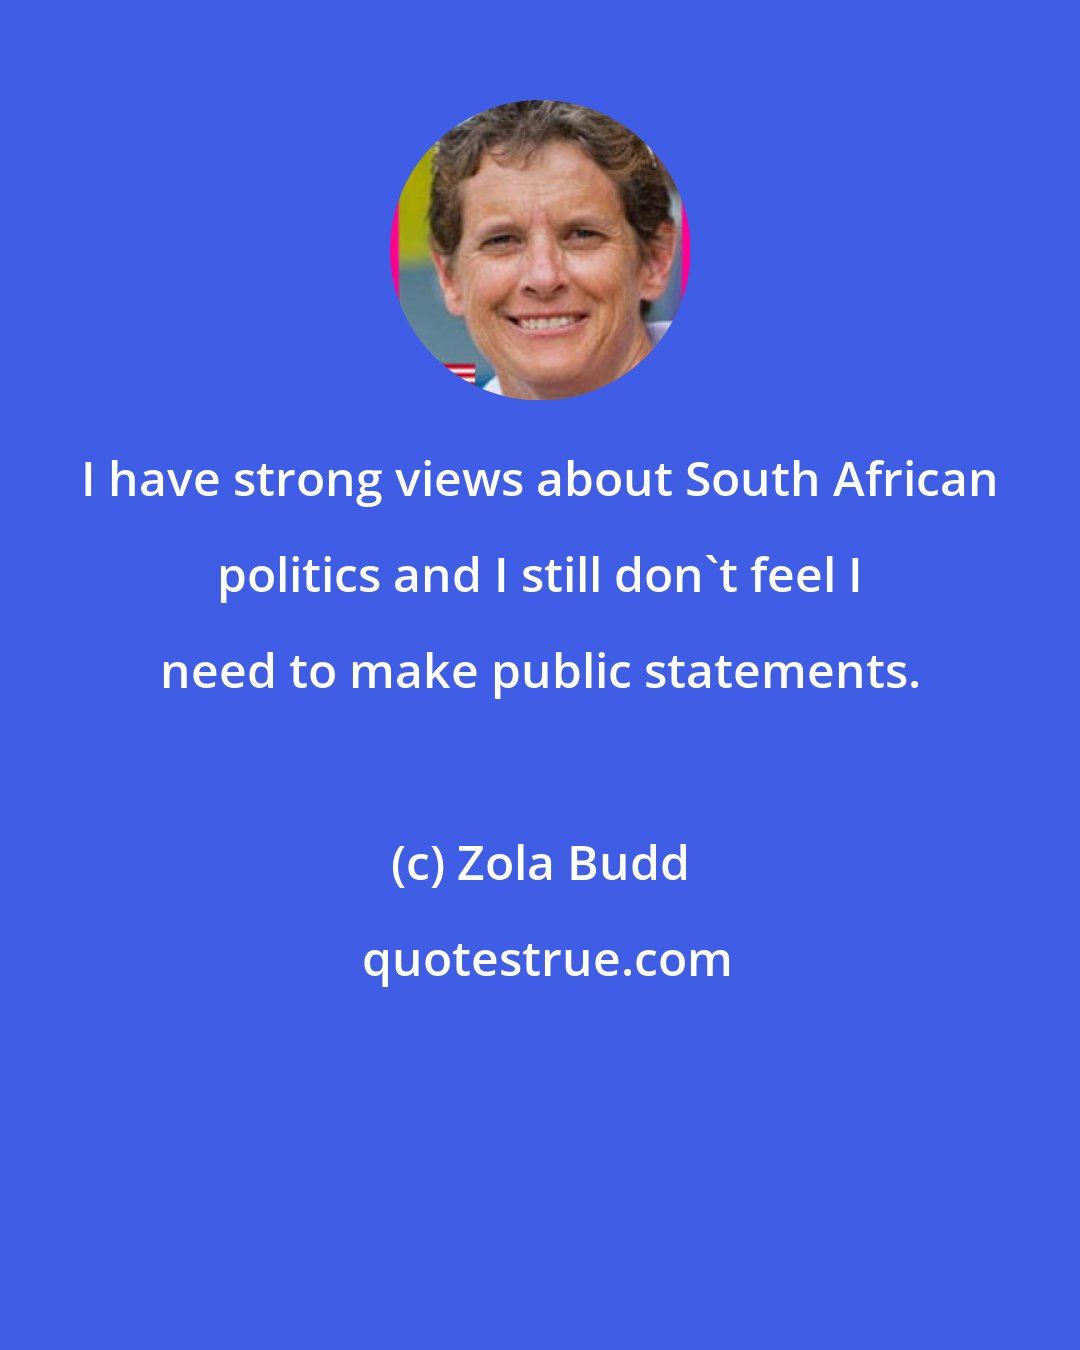 Zola Budd: I have strong views about South African politics and I still don't feel I need to make public statements.